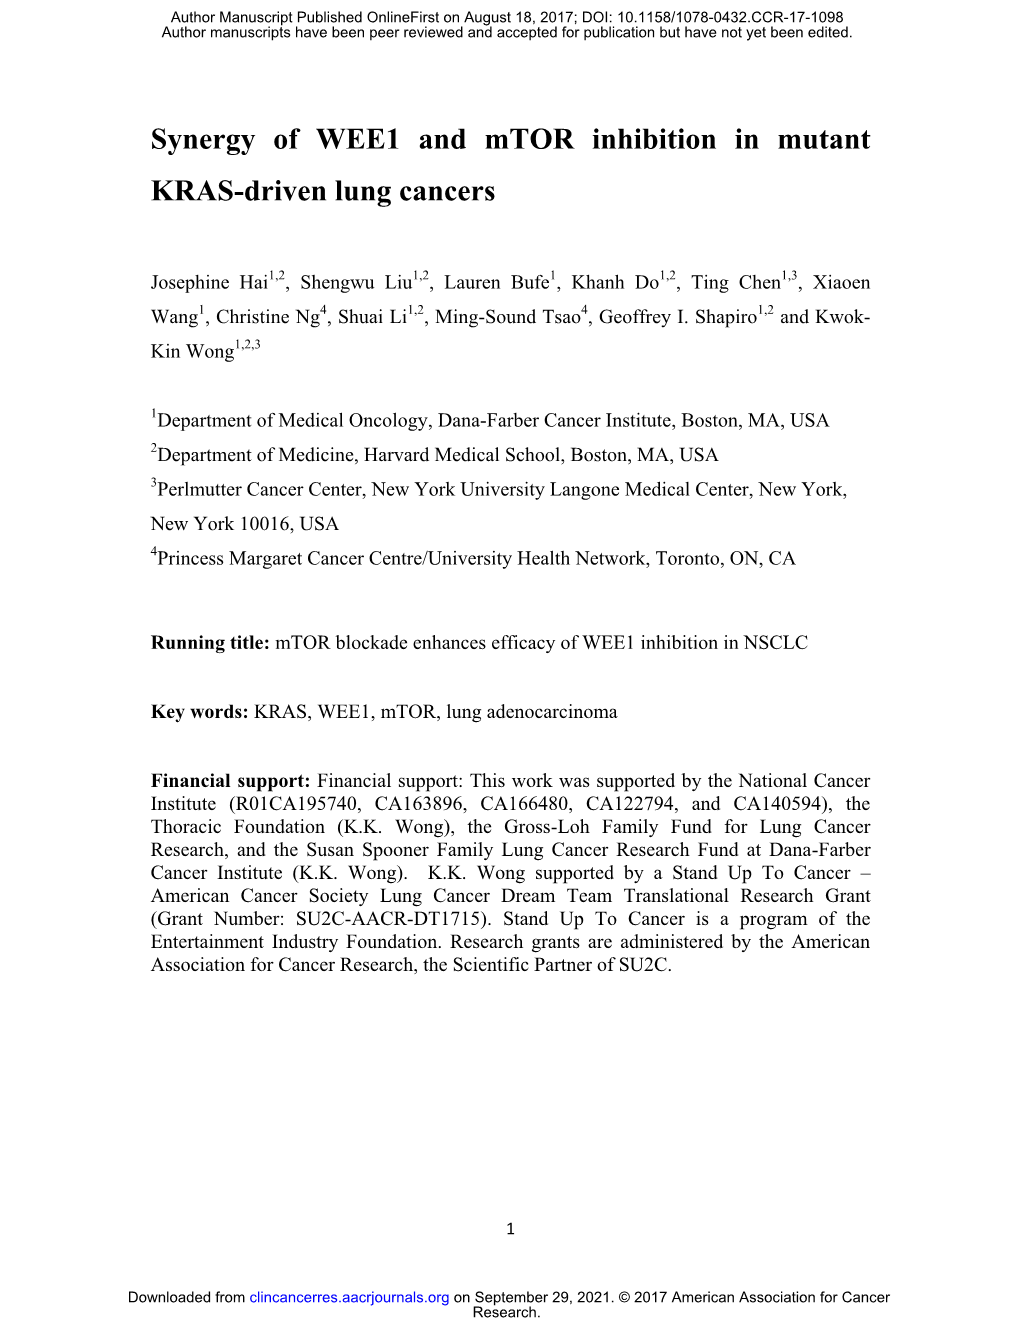 Synergy of WEE1 and Mtor Inhibition in Mutant KRAS-Driven Lung Cancers